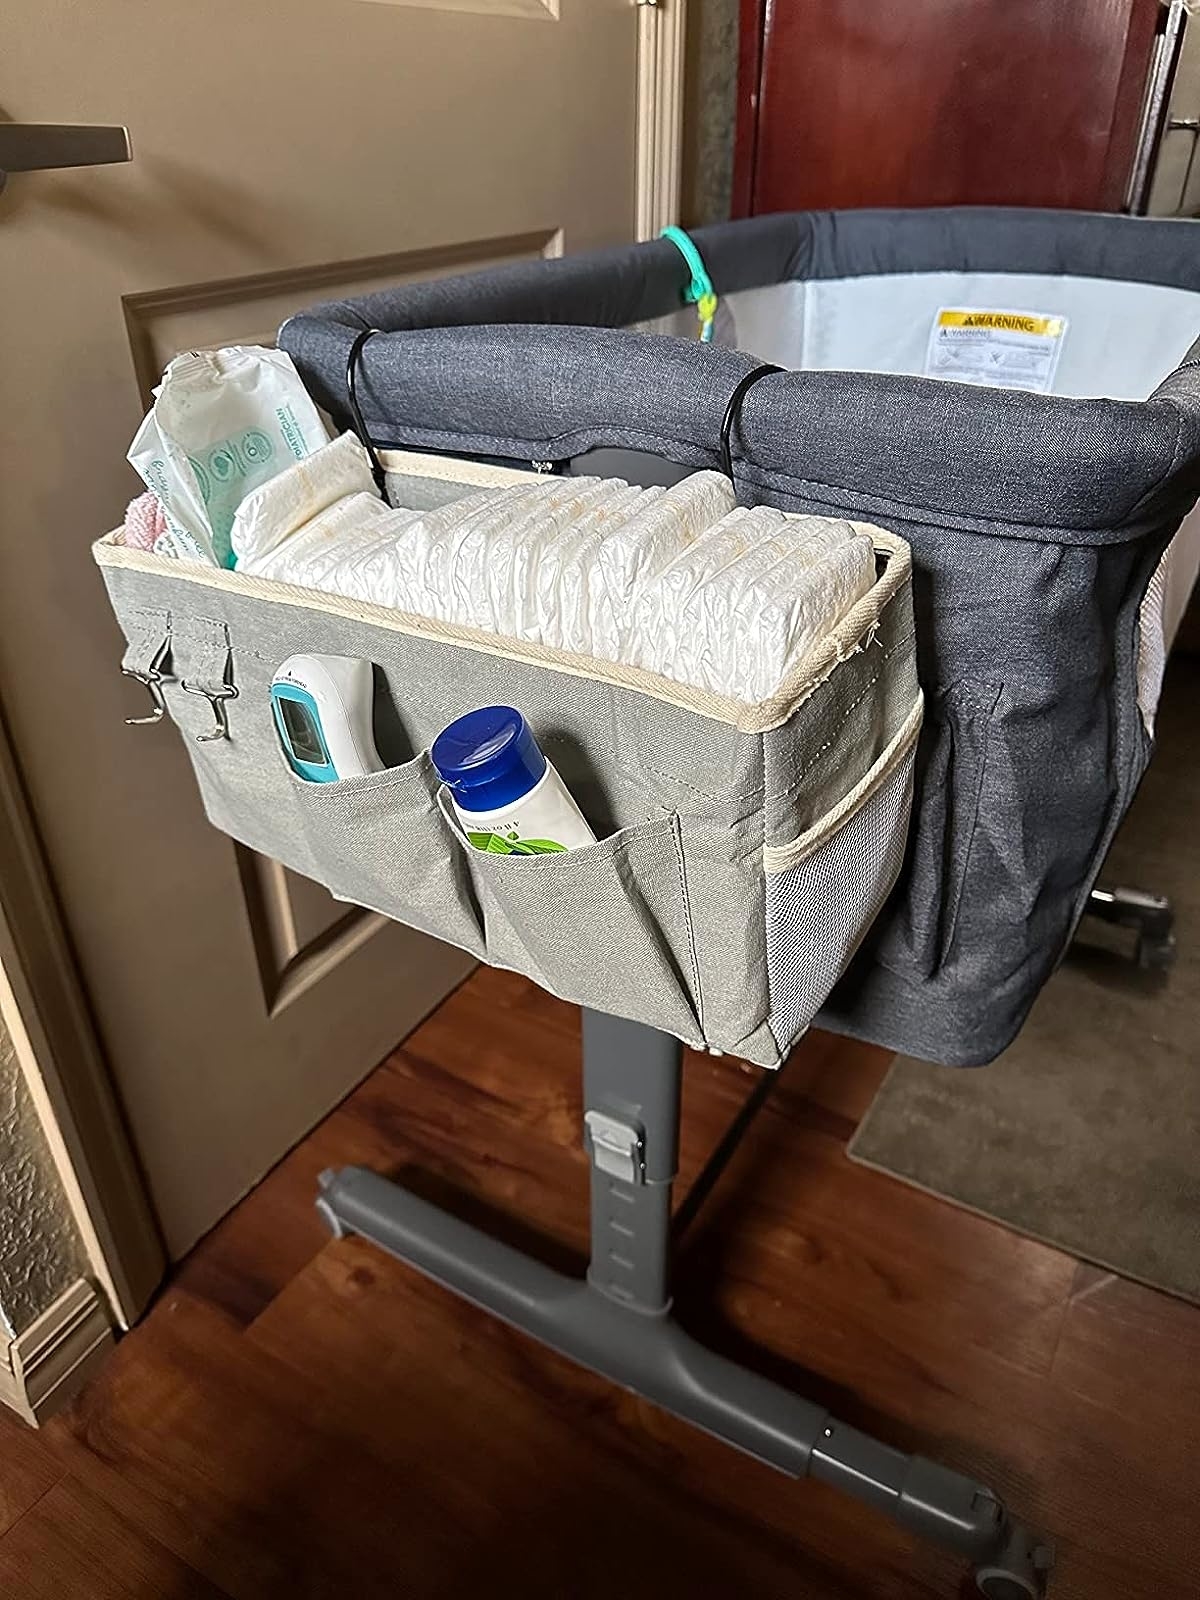 Reviewer image of the caddy hanging on a bassinet, filled with baby essentials